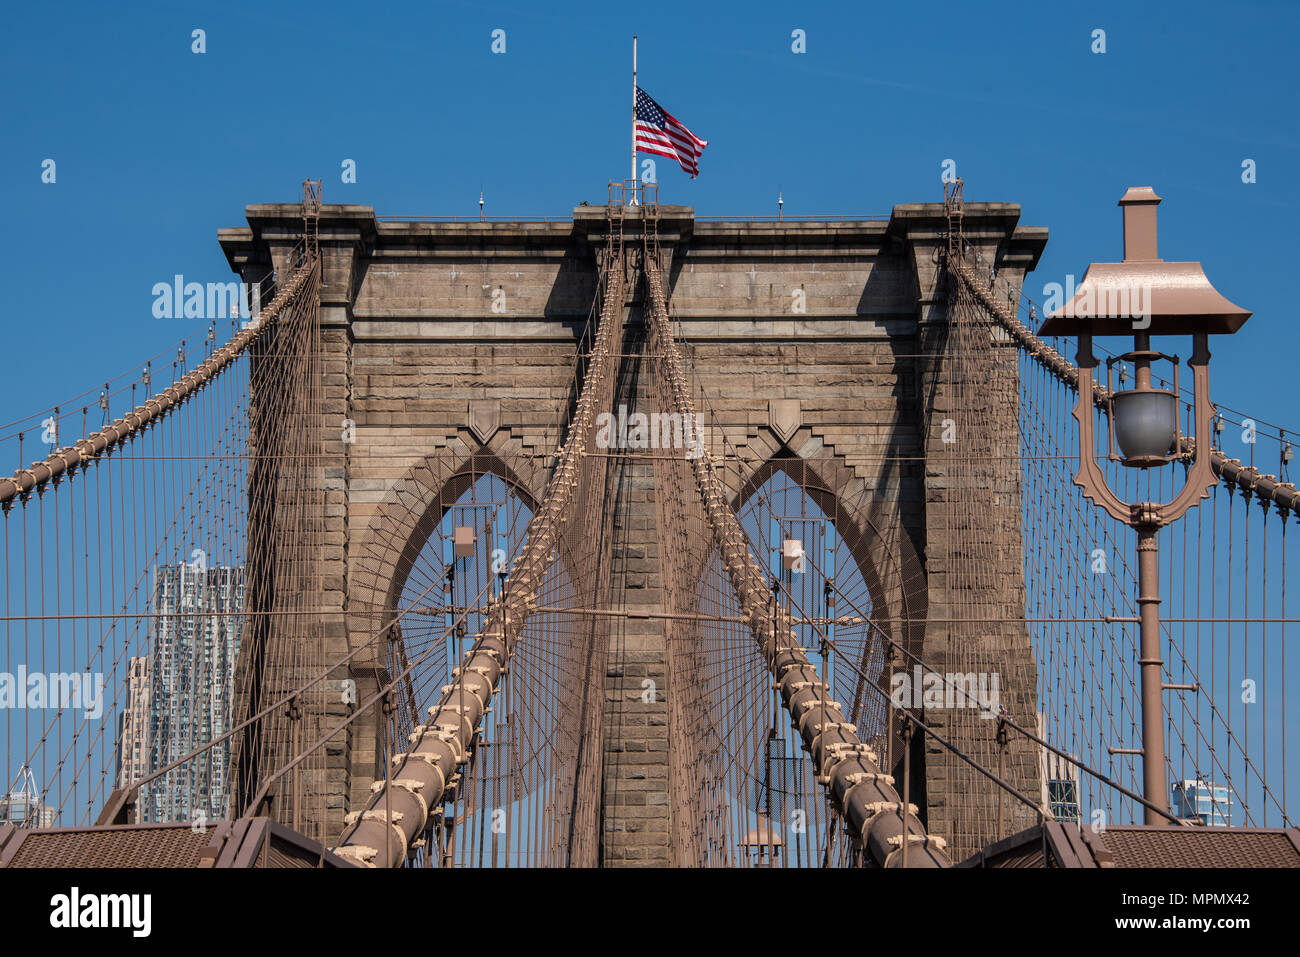 The Brooklyn Bridge, built between 1869 and 1883, connects Manhattan with New York's most populous borough, Brooklyn. Stock Photo